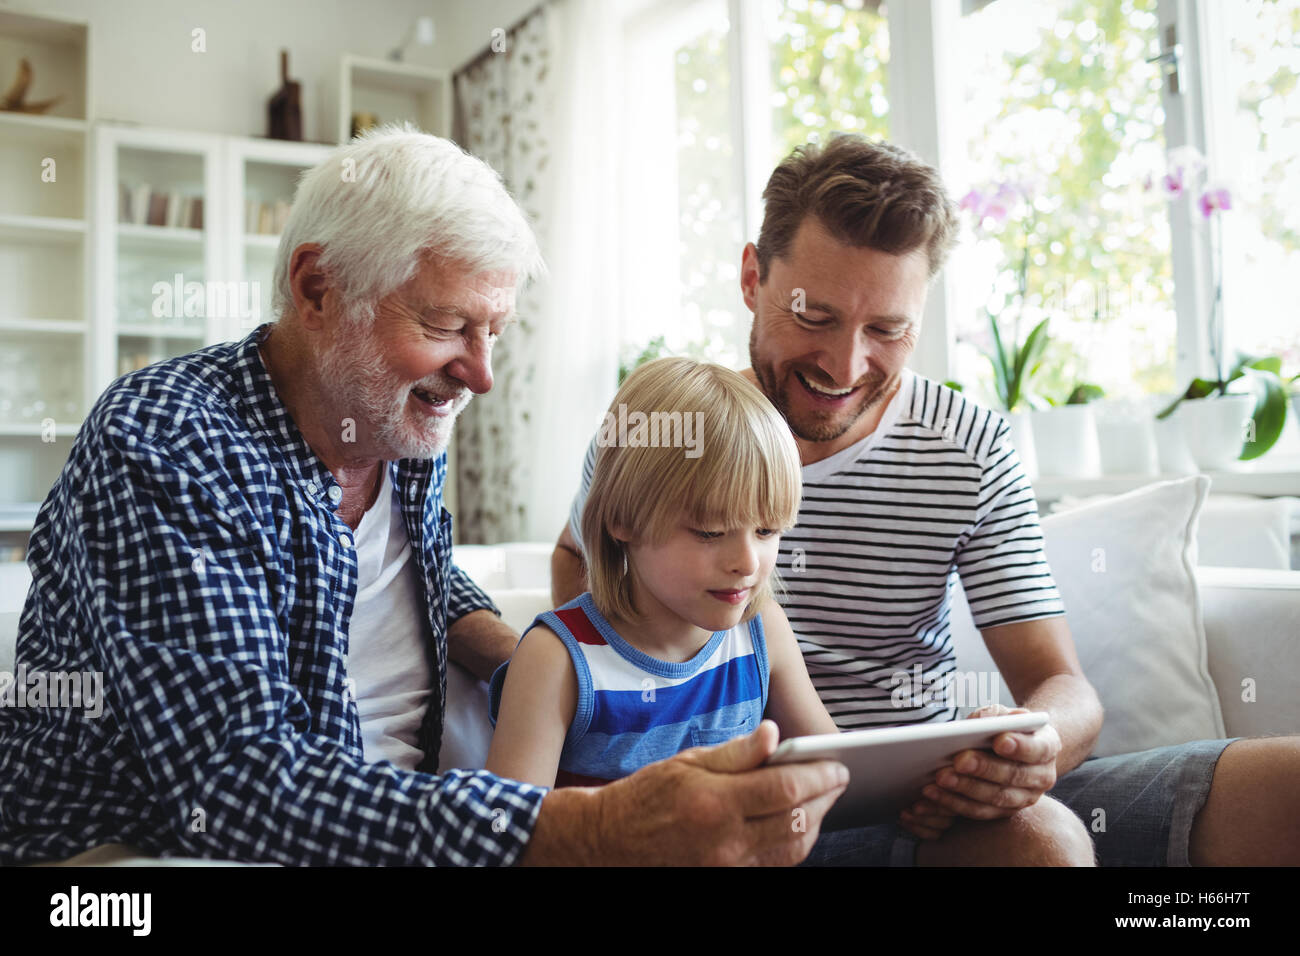 Boy using digital tablet with his father and grandfather in living room Stock Photo